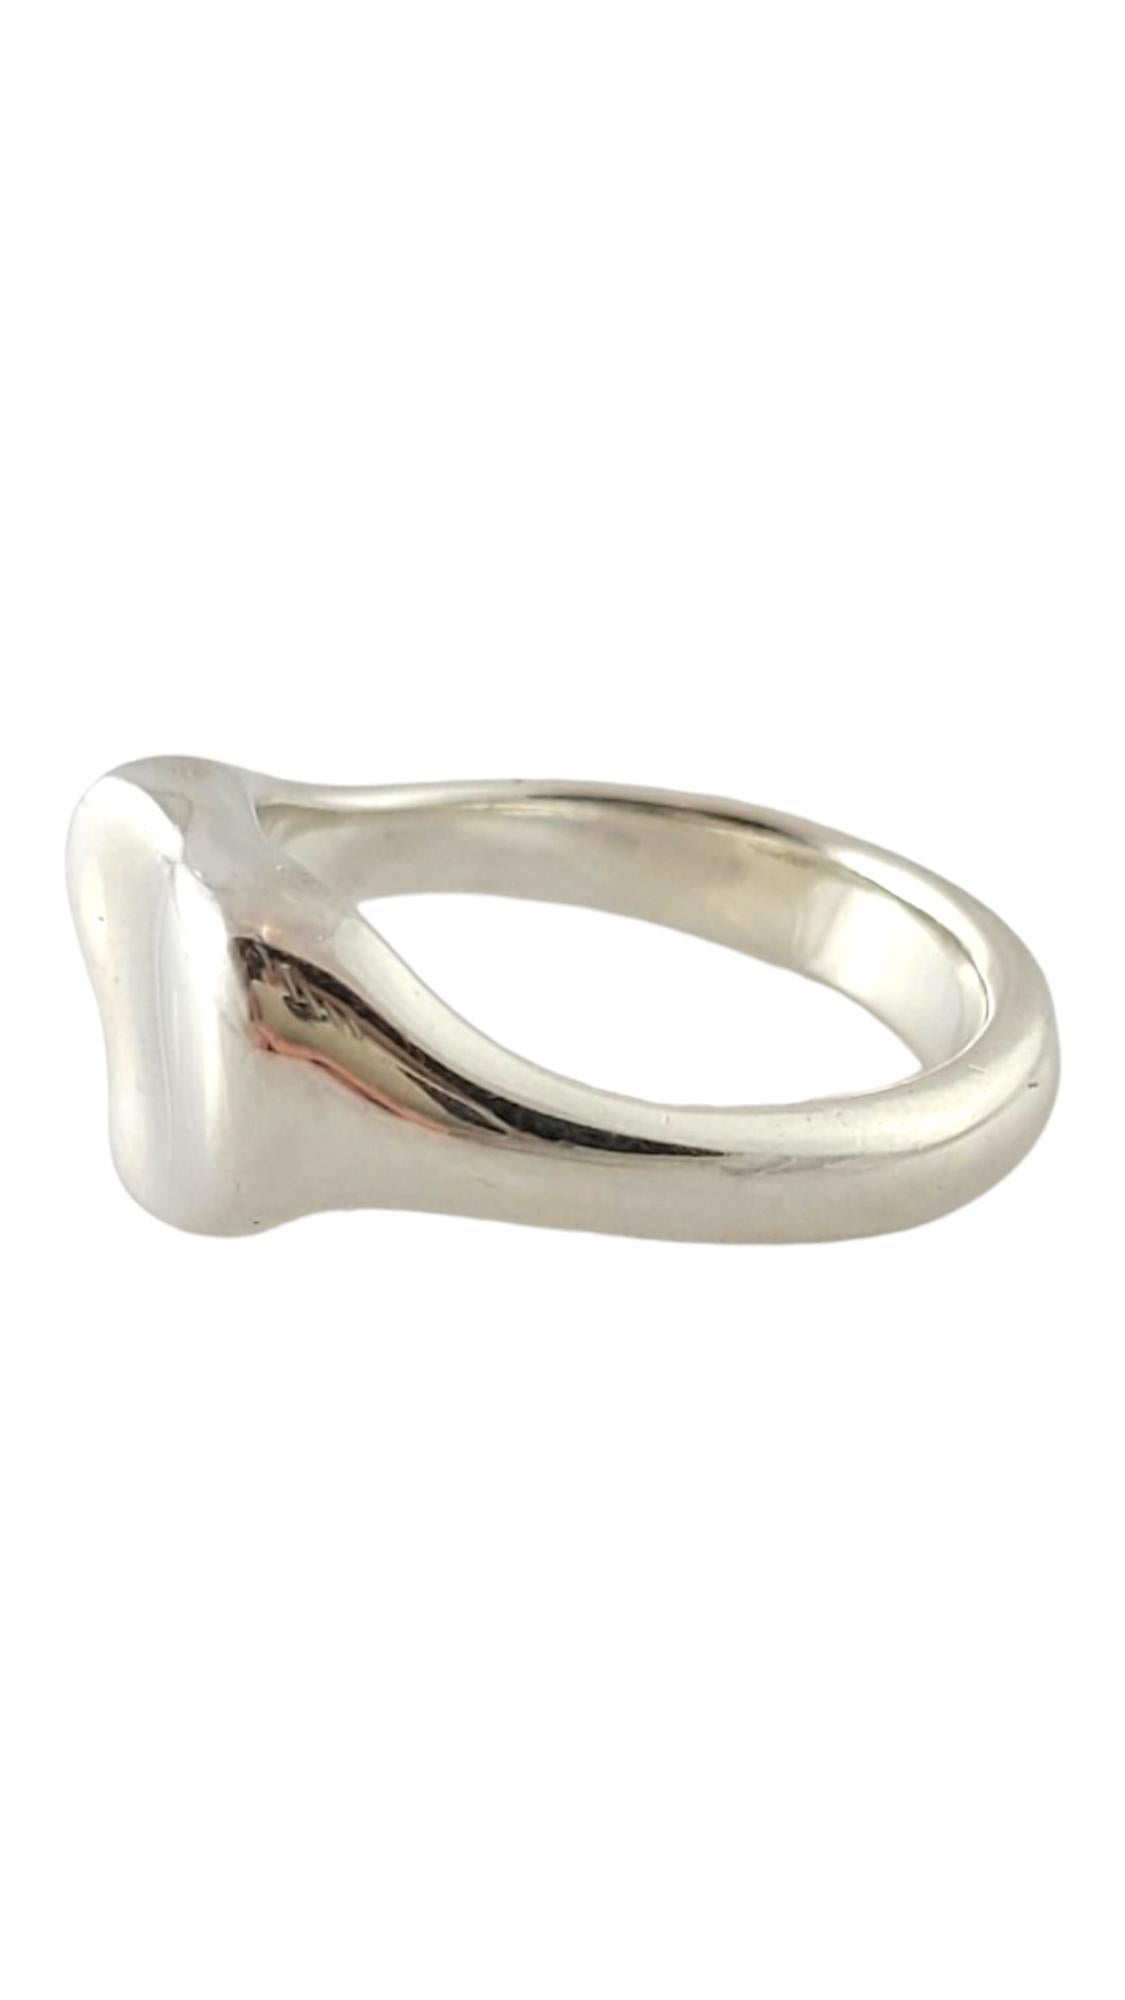 Tiffany & Co. Sterling Silver Elsa Peretti Full Heart Ring Size 5.75

This gorgeous full heart ring is crafted from sterling silver by designer Tiffany & Co and would look beautiful on anybody!

Ring size: 5.75
Shak: 4.12mm
Front: 9.96mm

Weight: